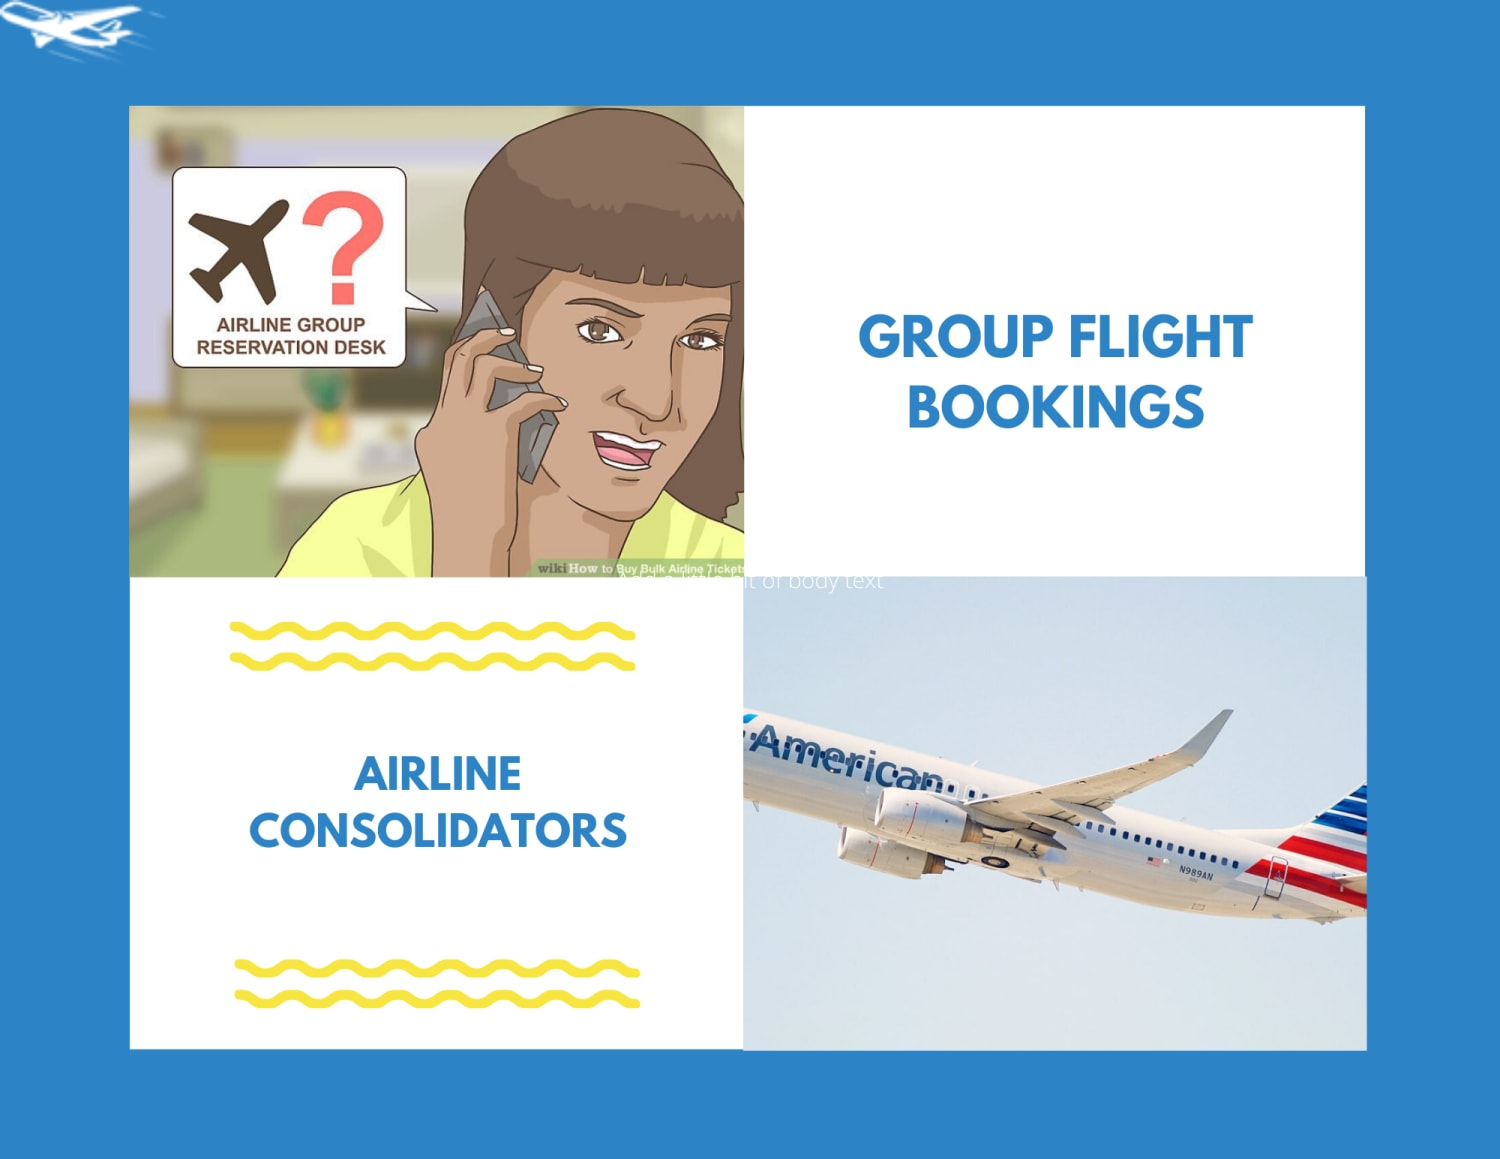 How to Buy consolidated flight tickets for large group